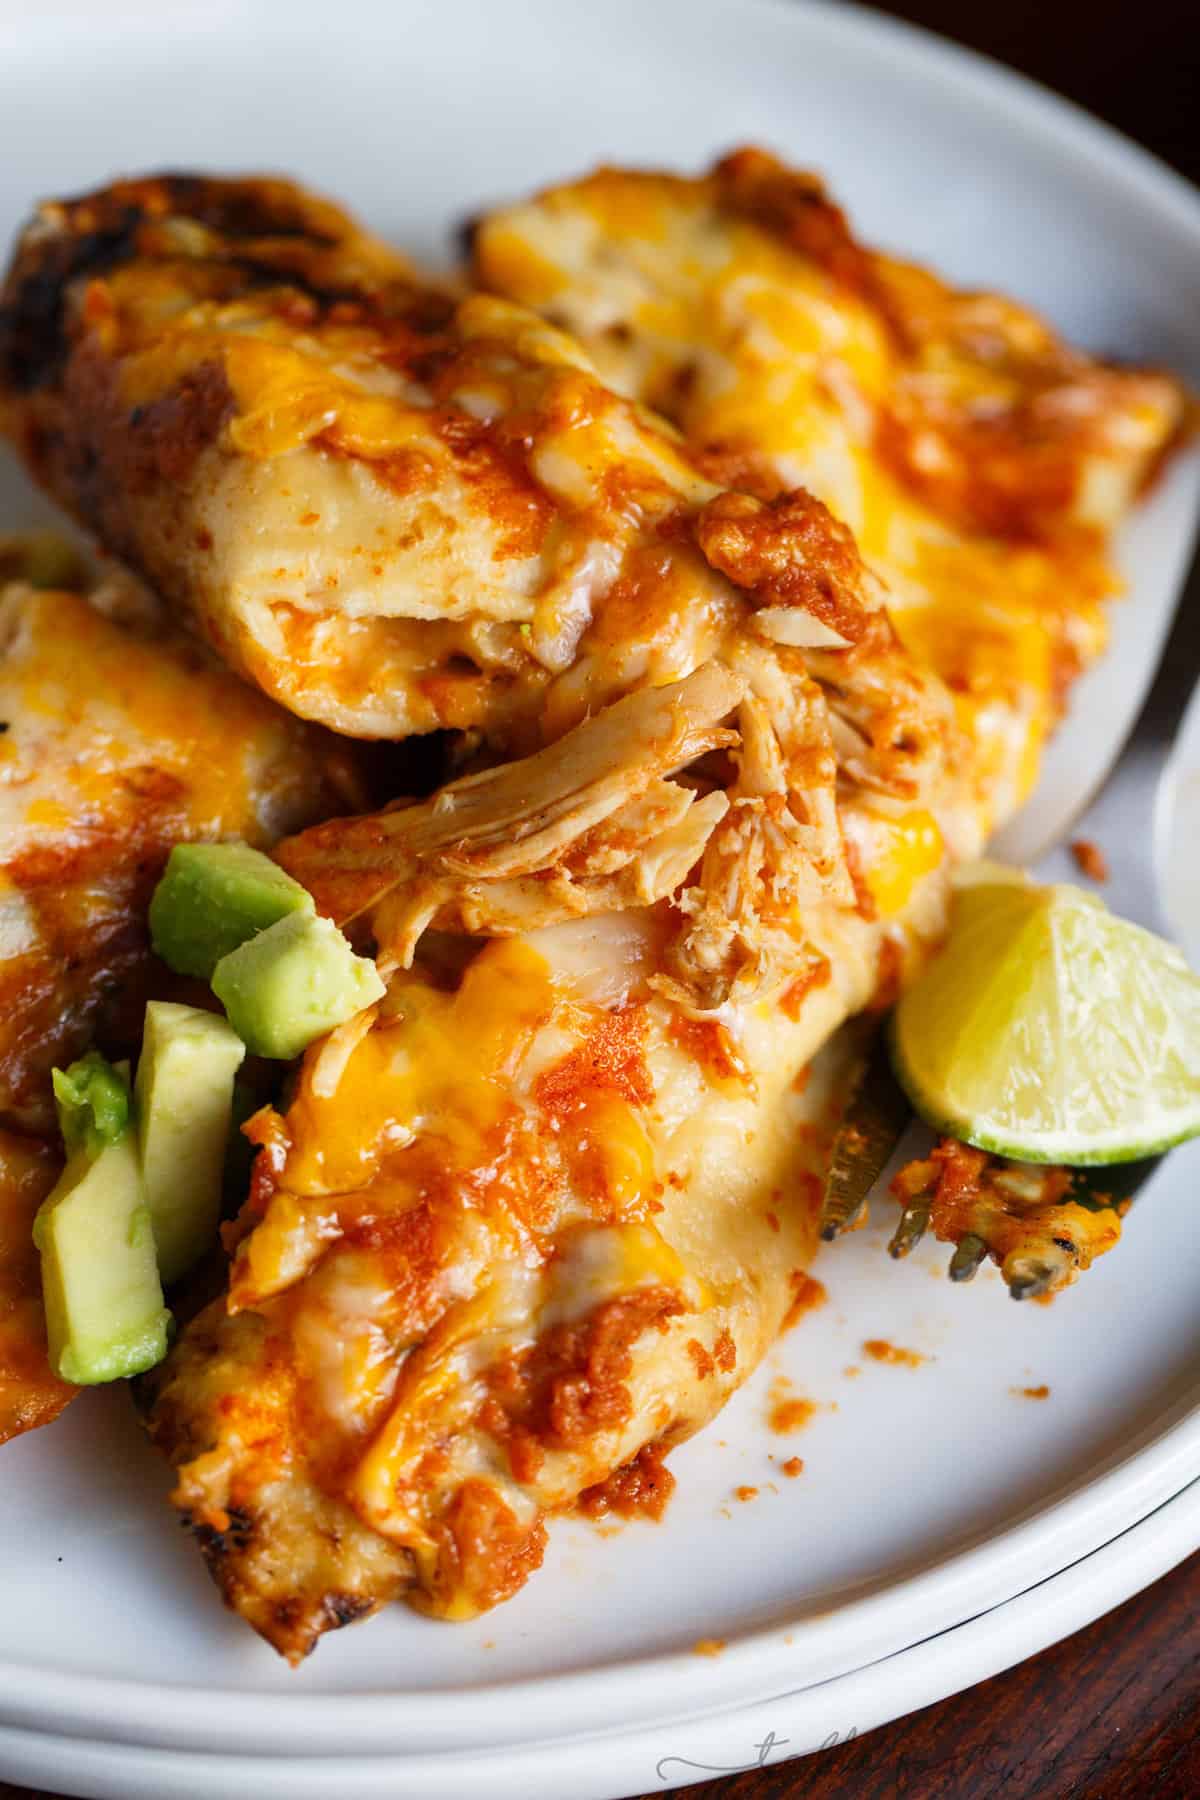 Homemade chicken enchiladas are a great comfort weeknight meal! Paired with a simple blender enchilada sauce, these will be a hit at the dinner table! #HuntsDifference #ad